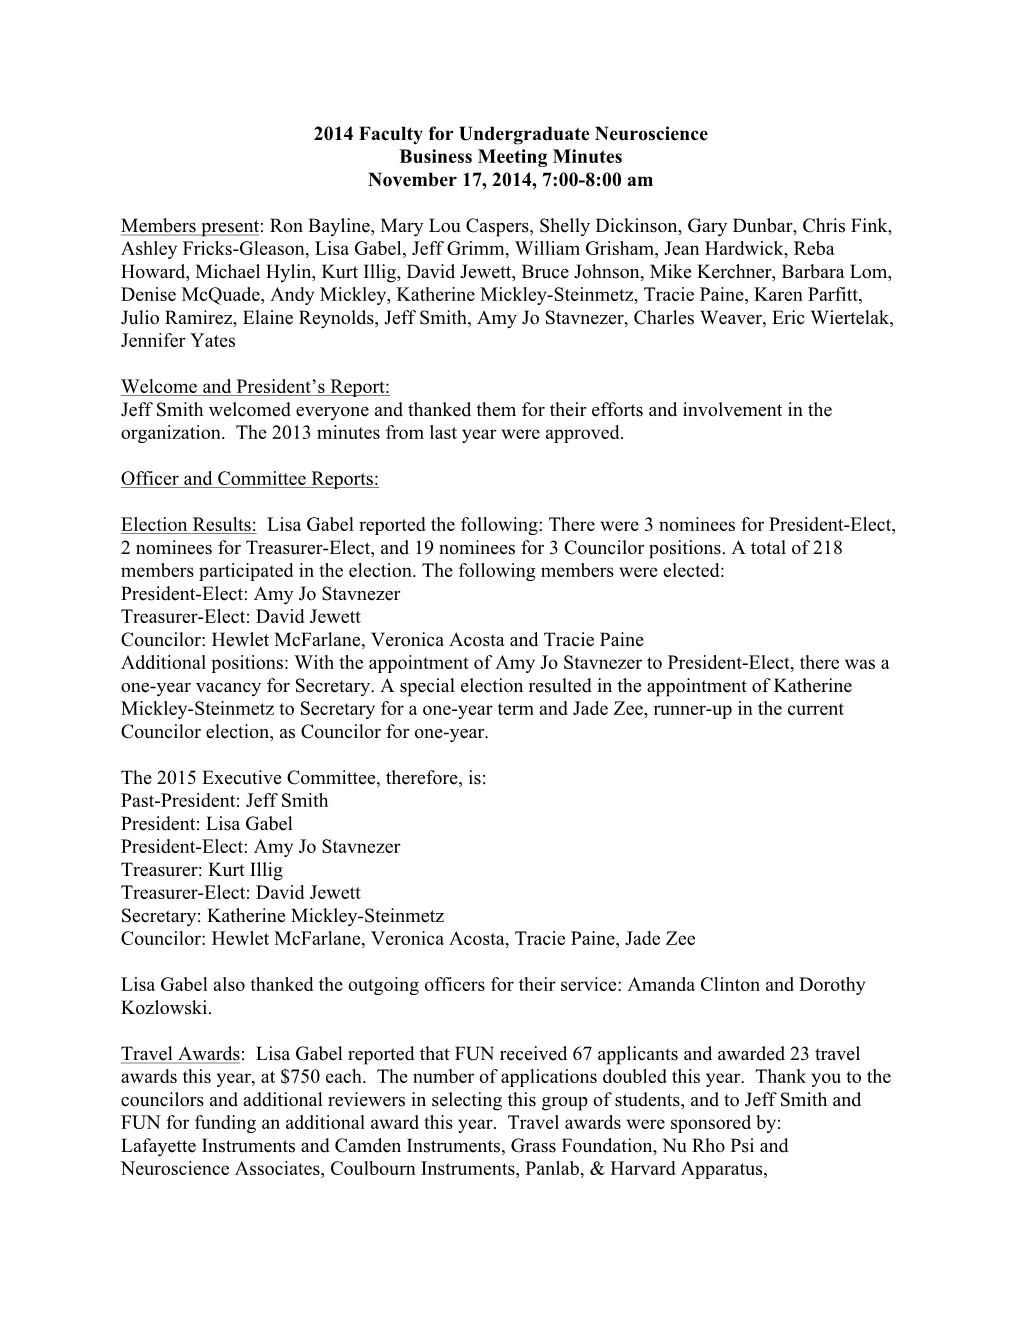 2014 Faculty for Undergraduate Neuroscience Business Meeting Minutes November 17, 2014, 7:00-8:00 Am